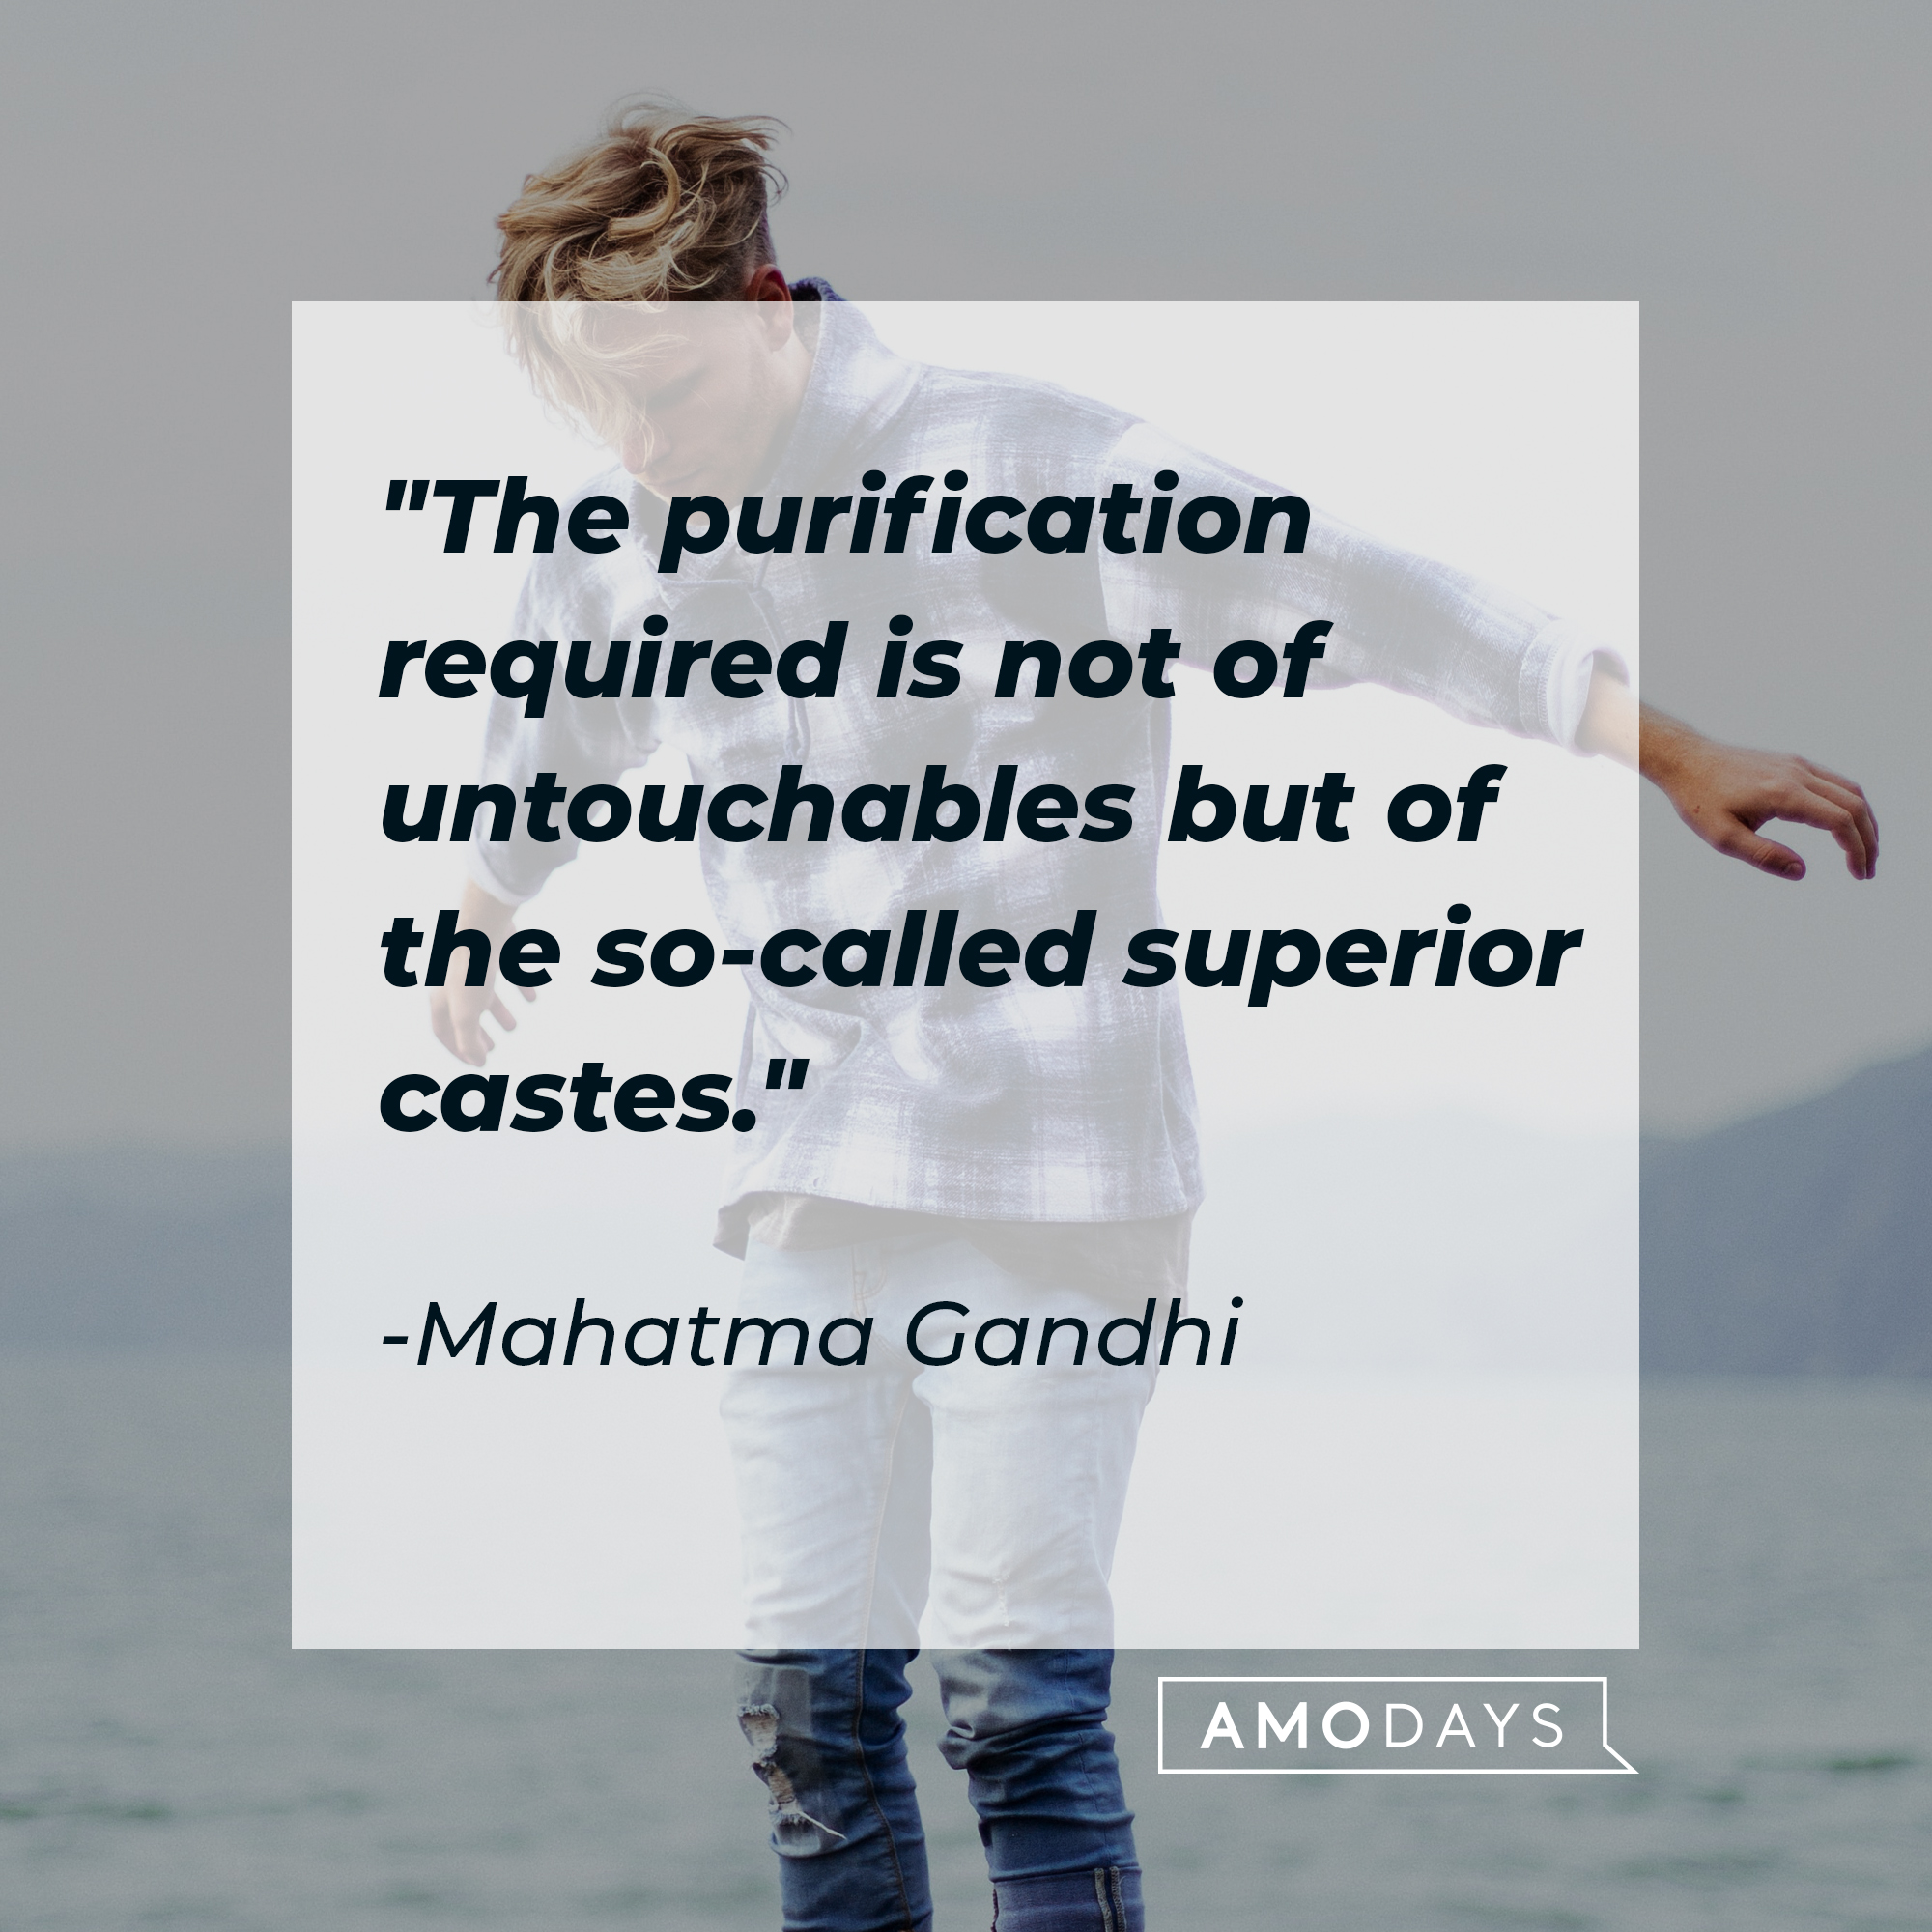 Mahatma Gandhi's quote: "The purification required is not of untouchables but of the so-called superior castes." | Source: Unsplash